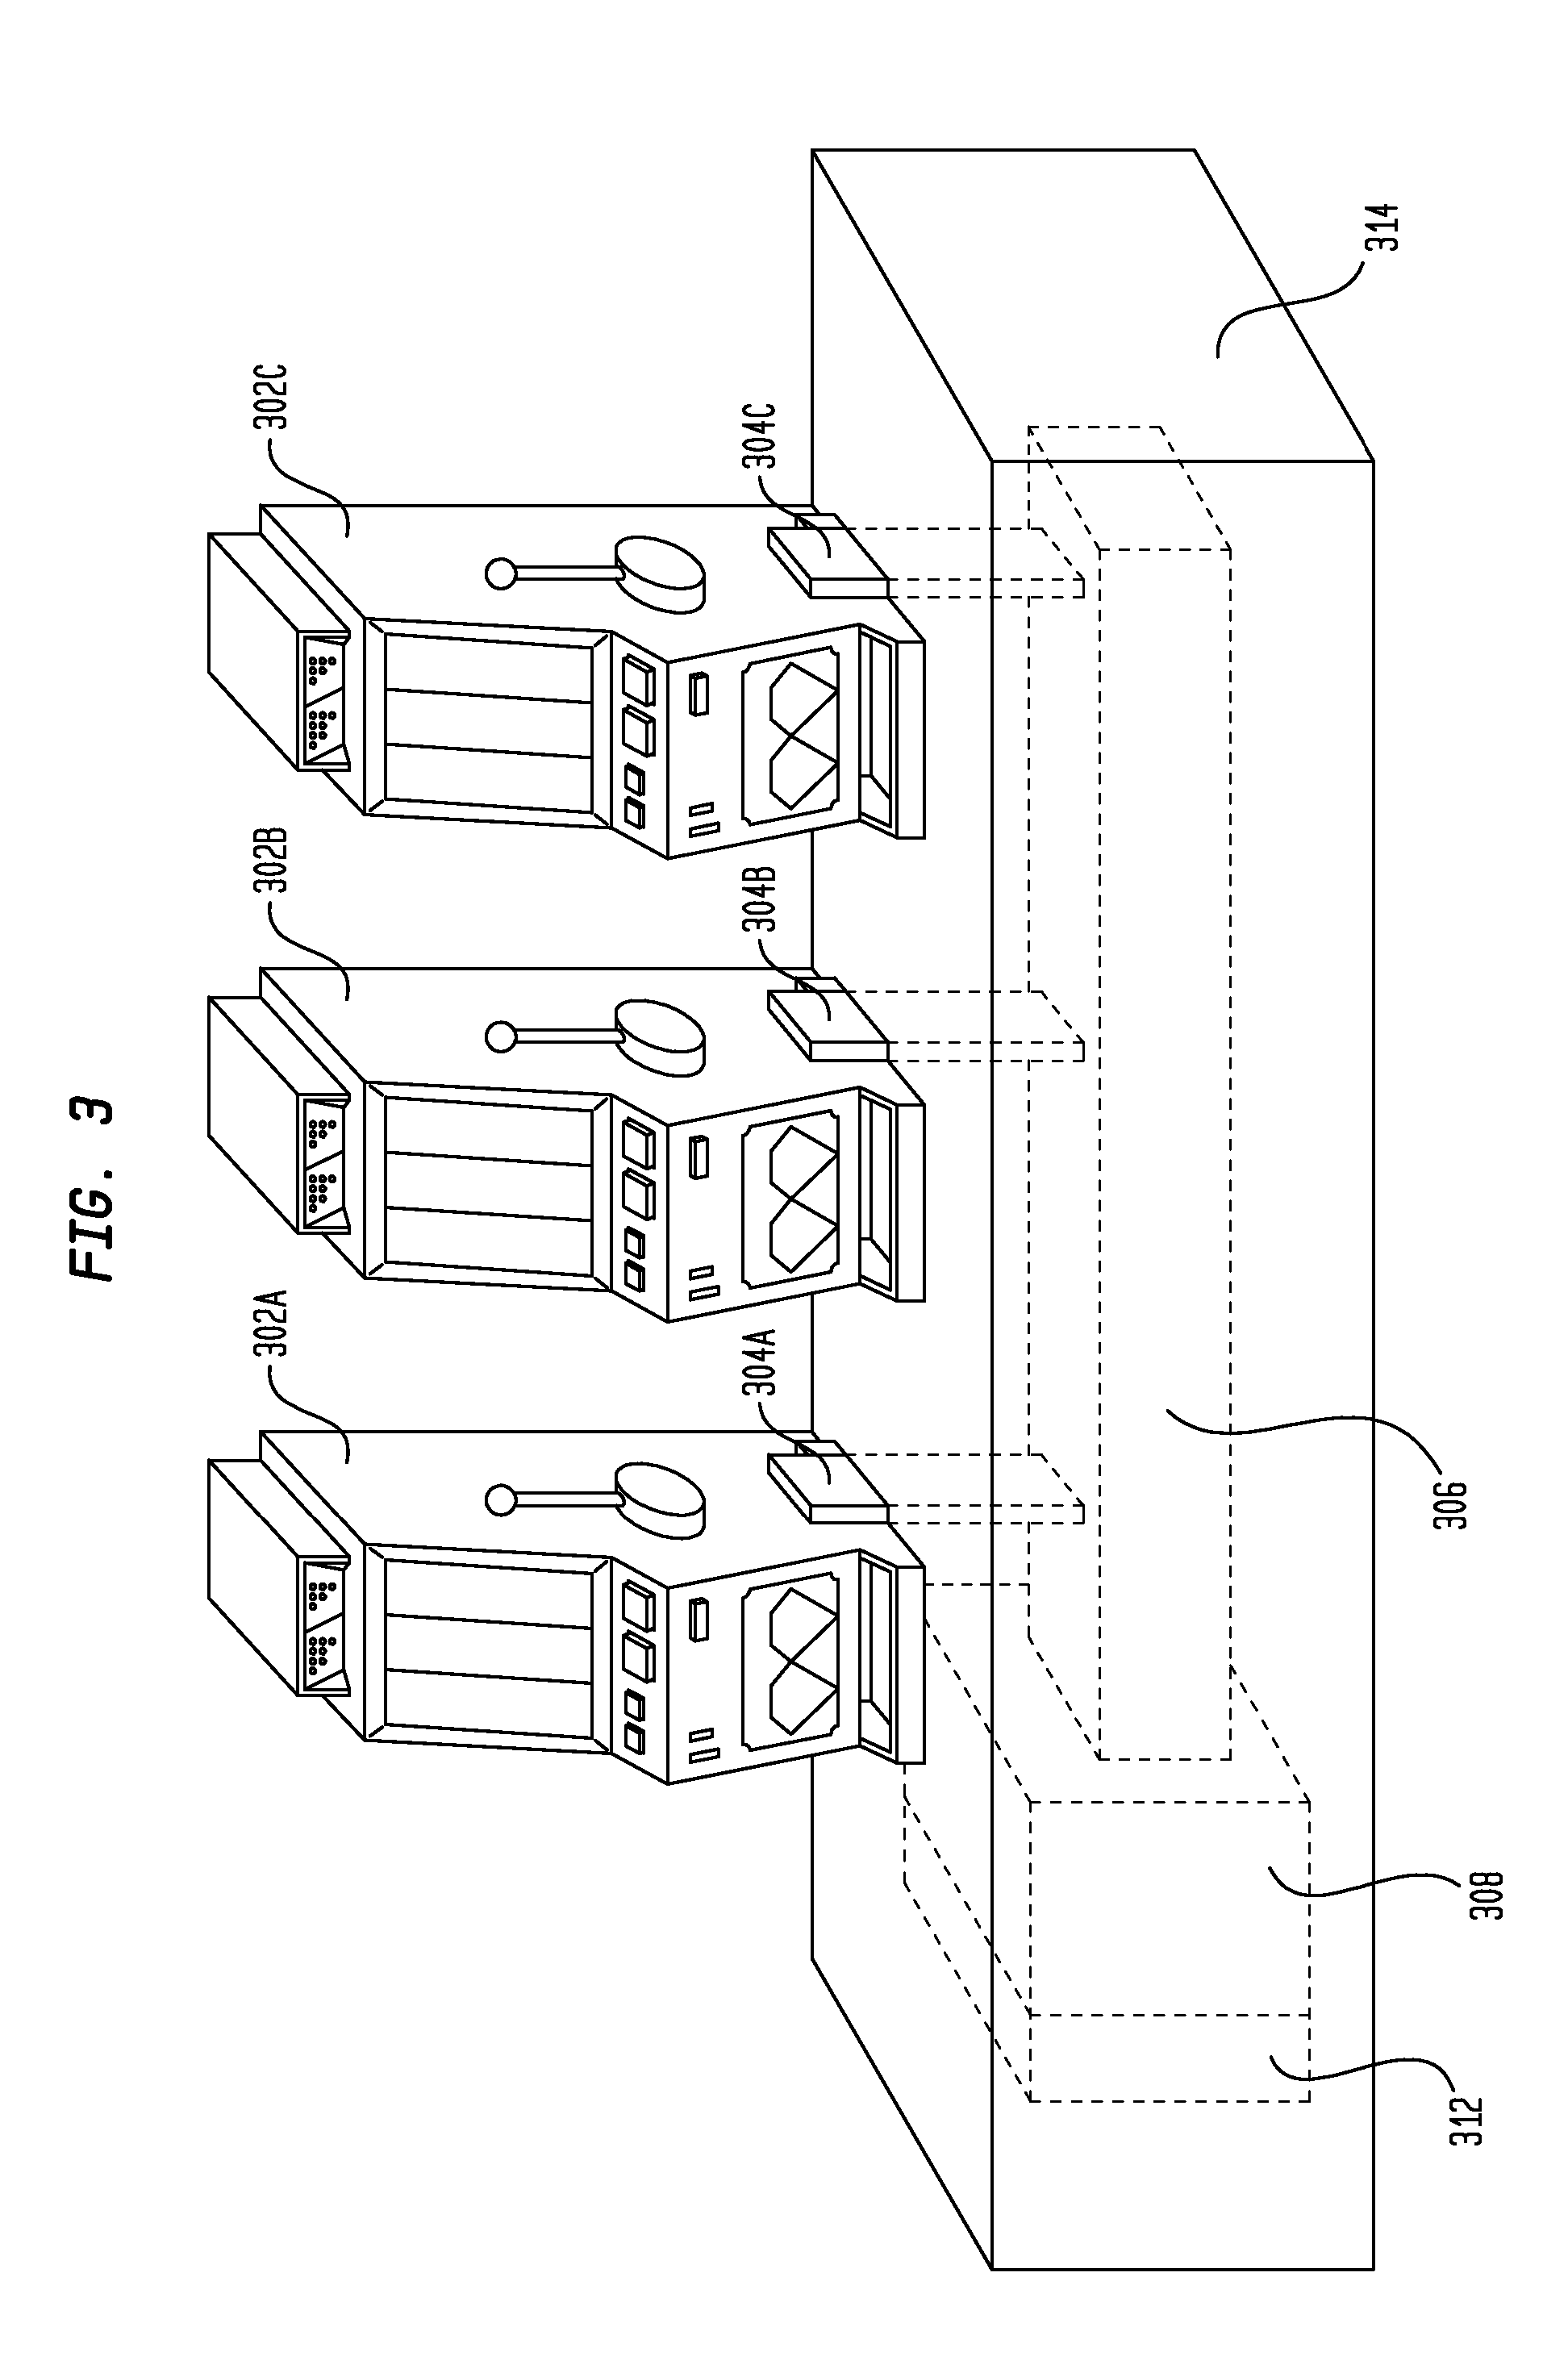 Distributed air cleaner system for enclosed electronic devices